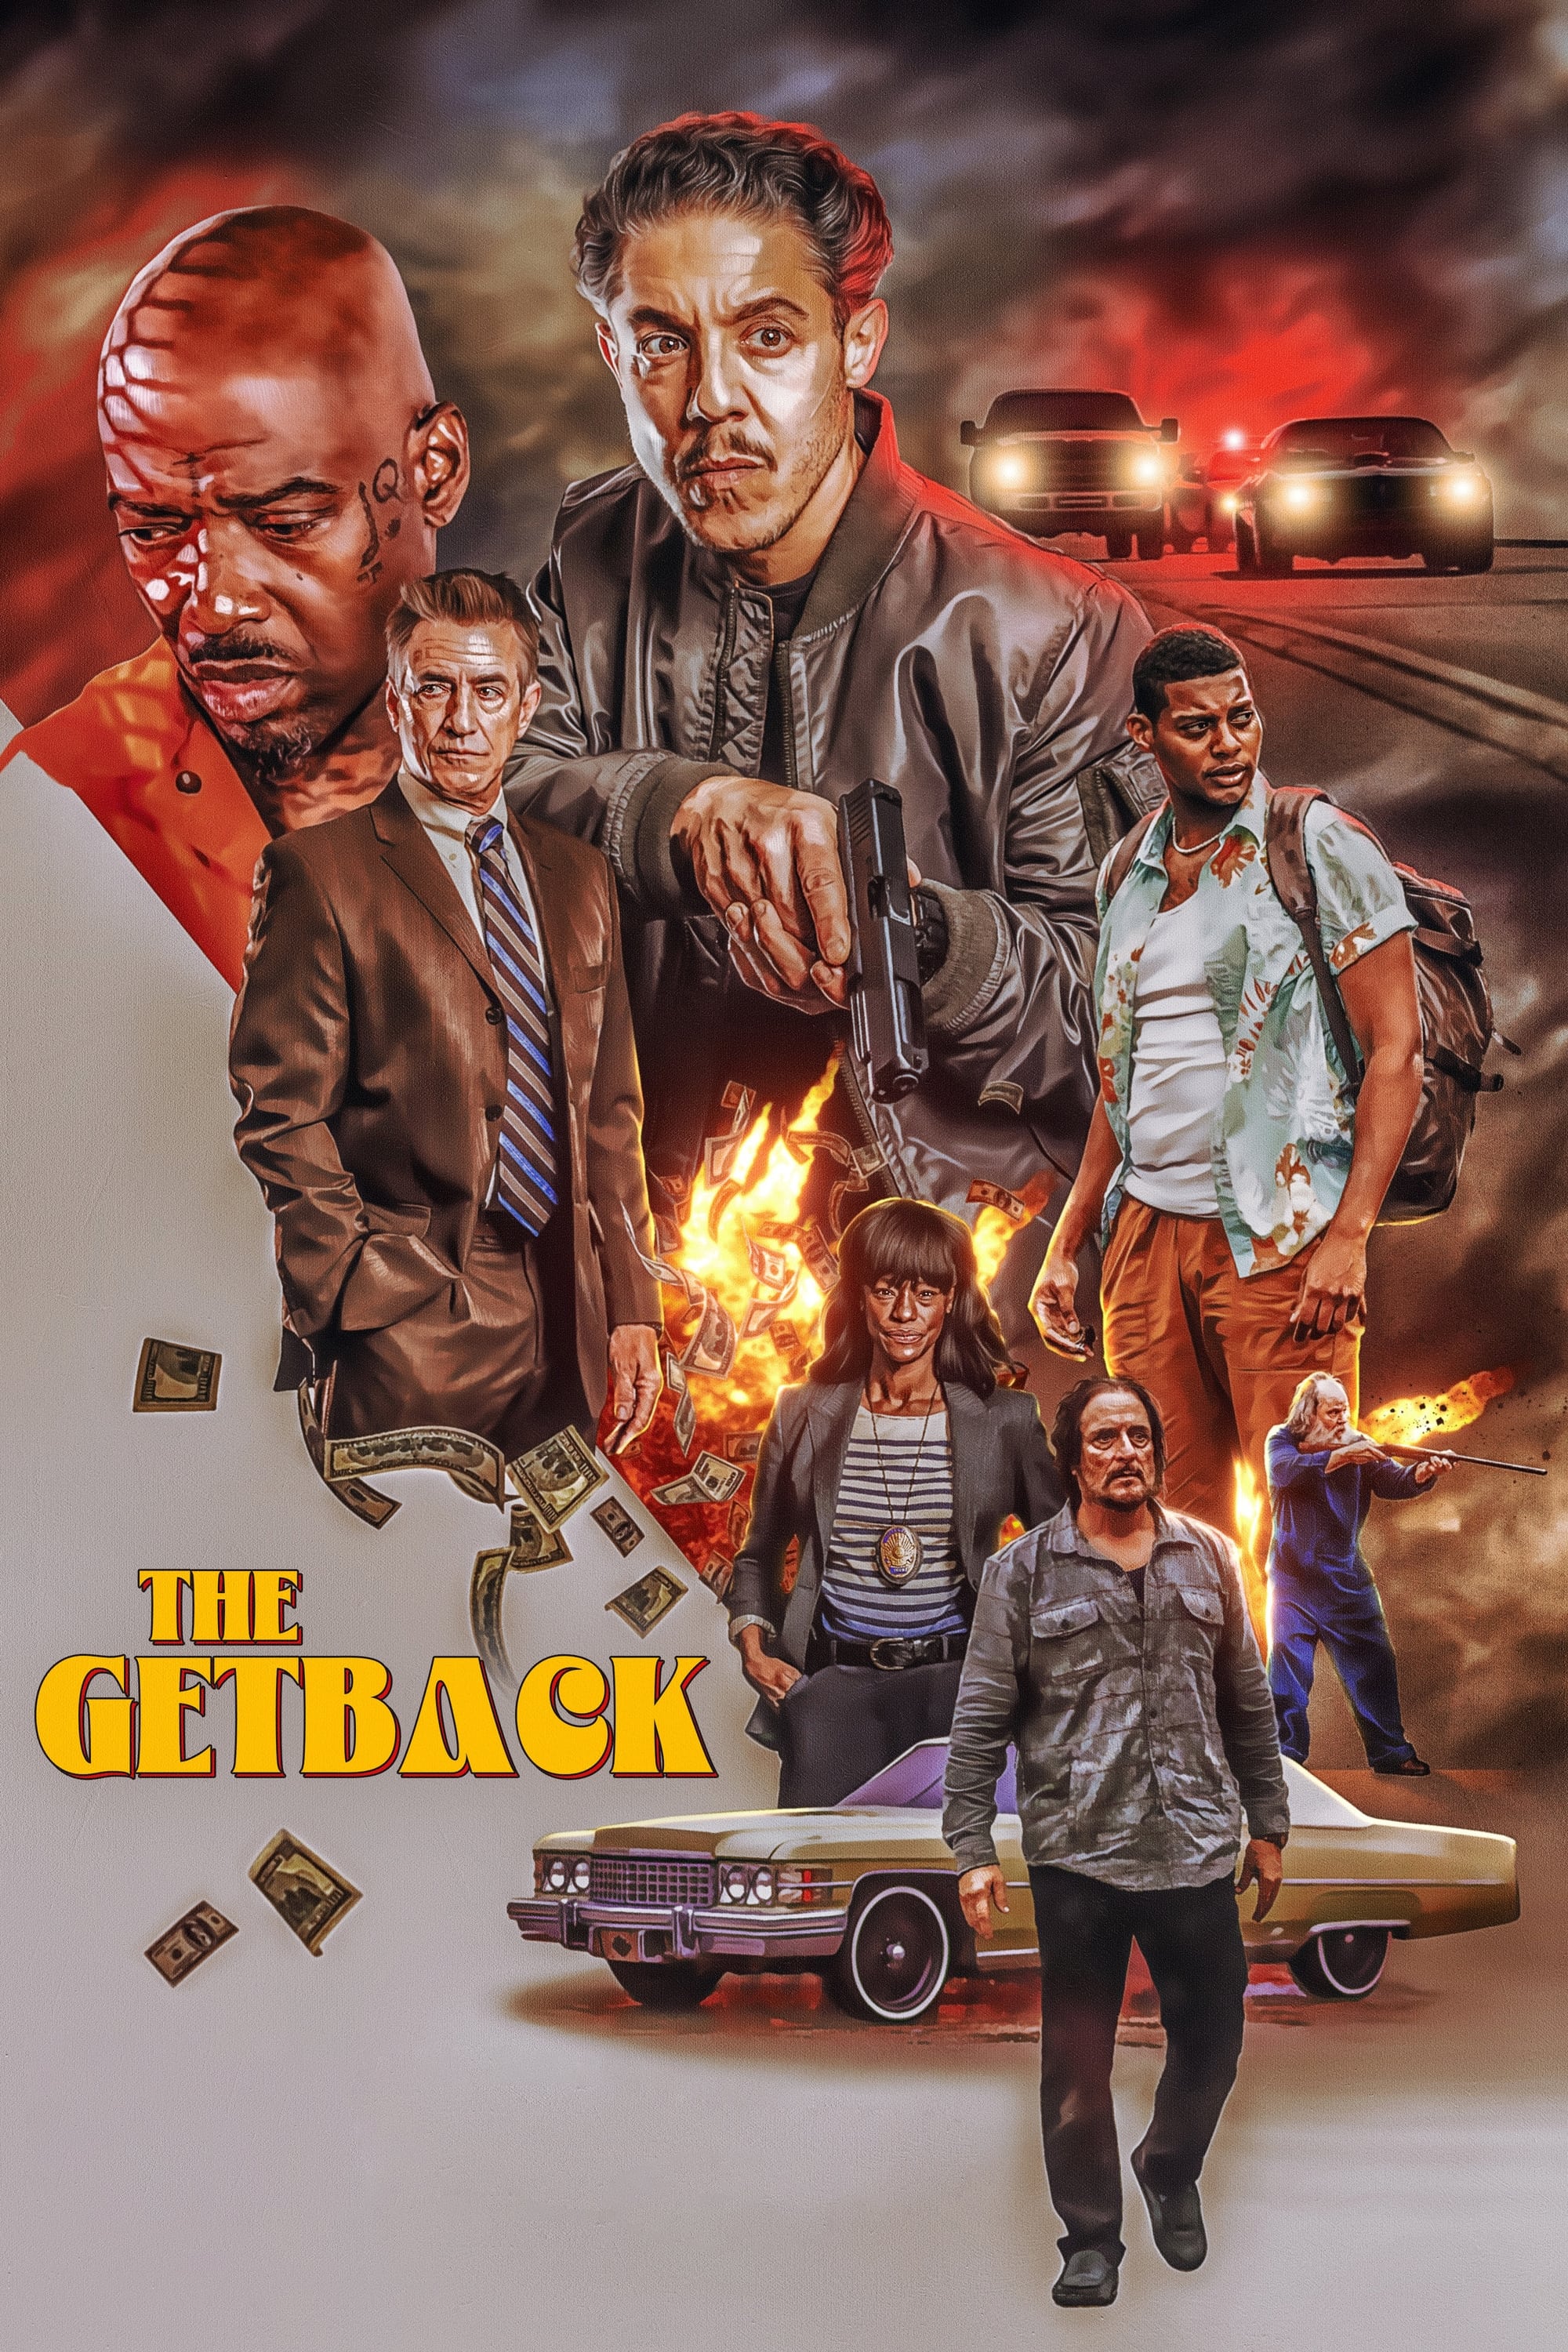 The Getback film